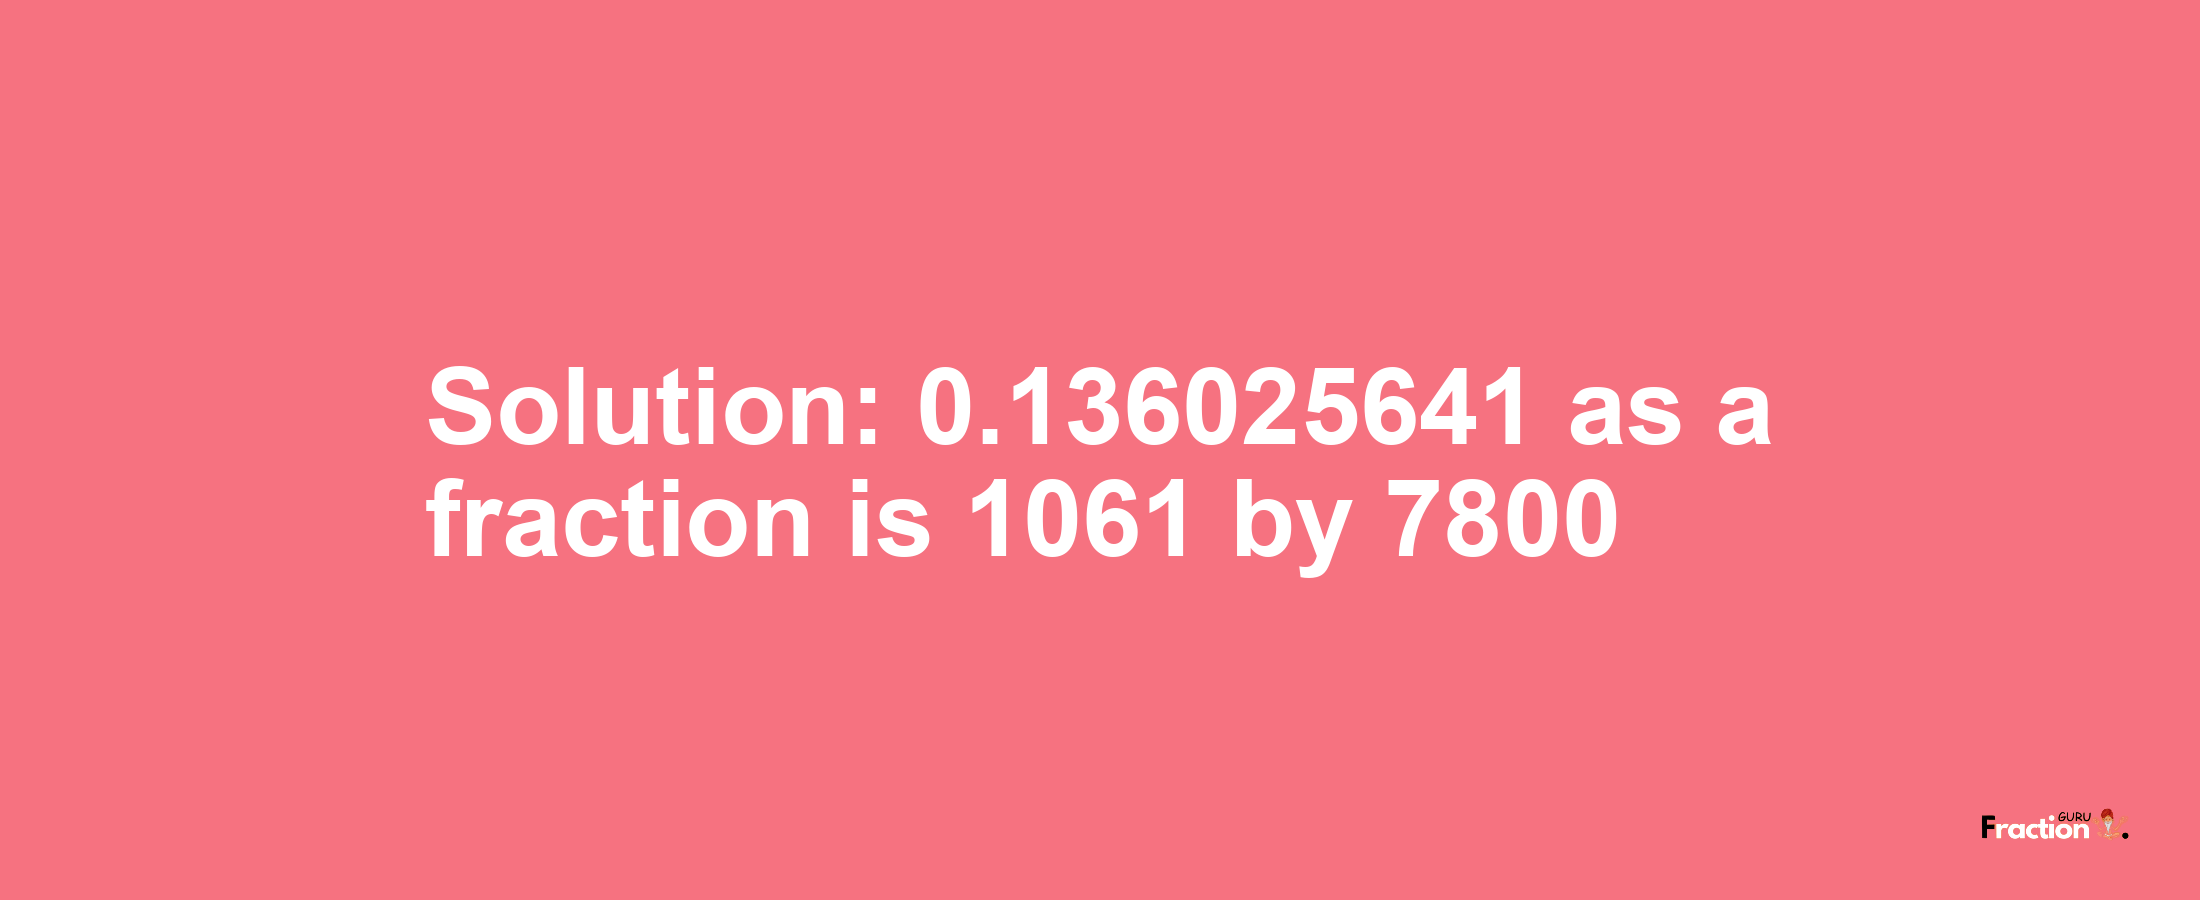 Solution:0.136025641 as a fraction is 1061/7800